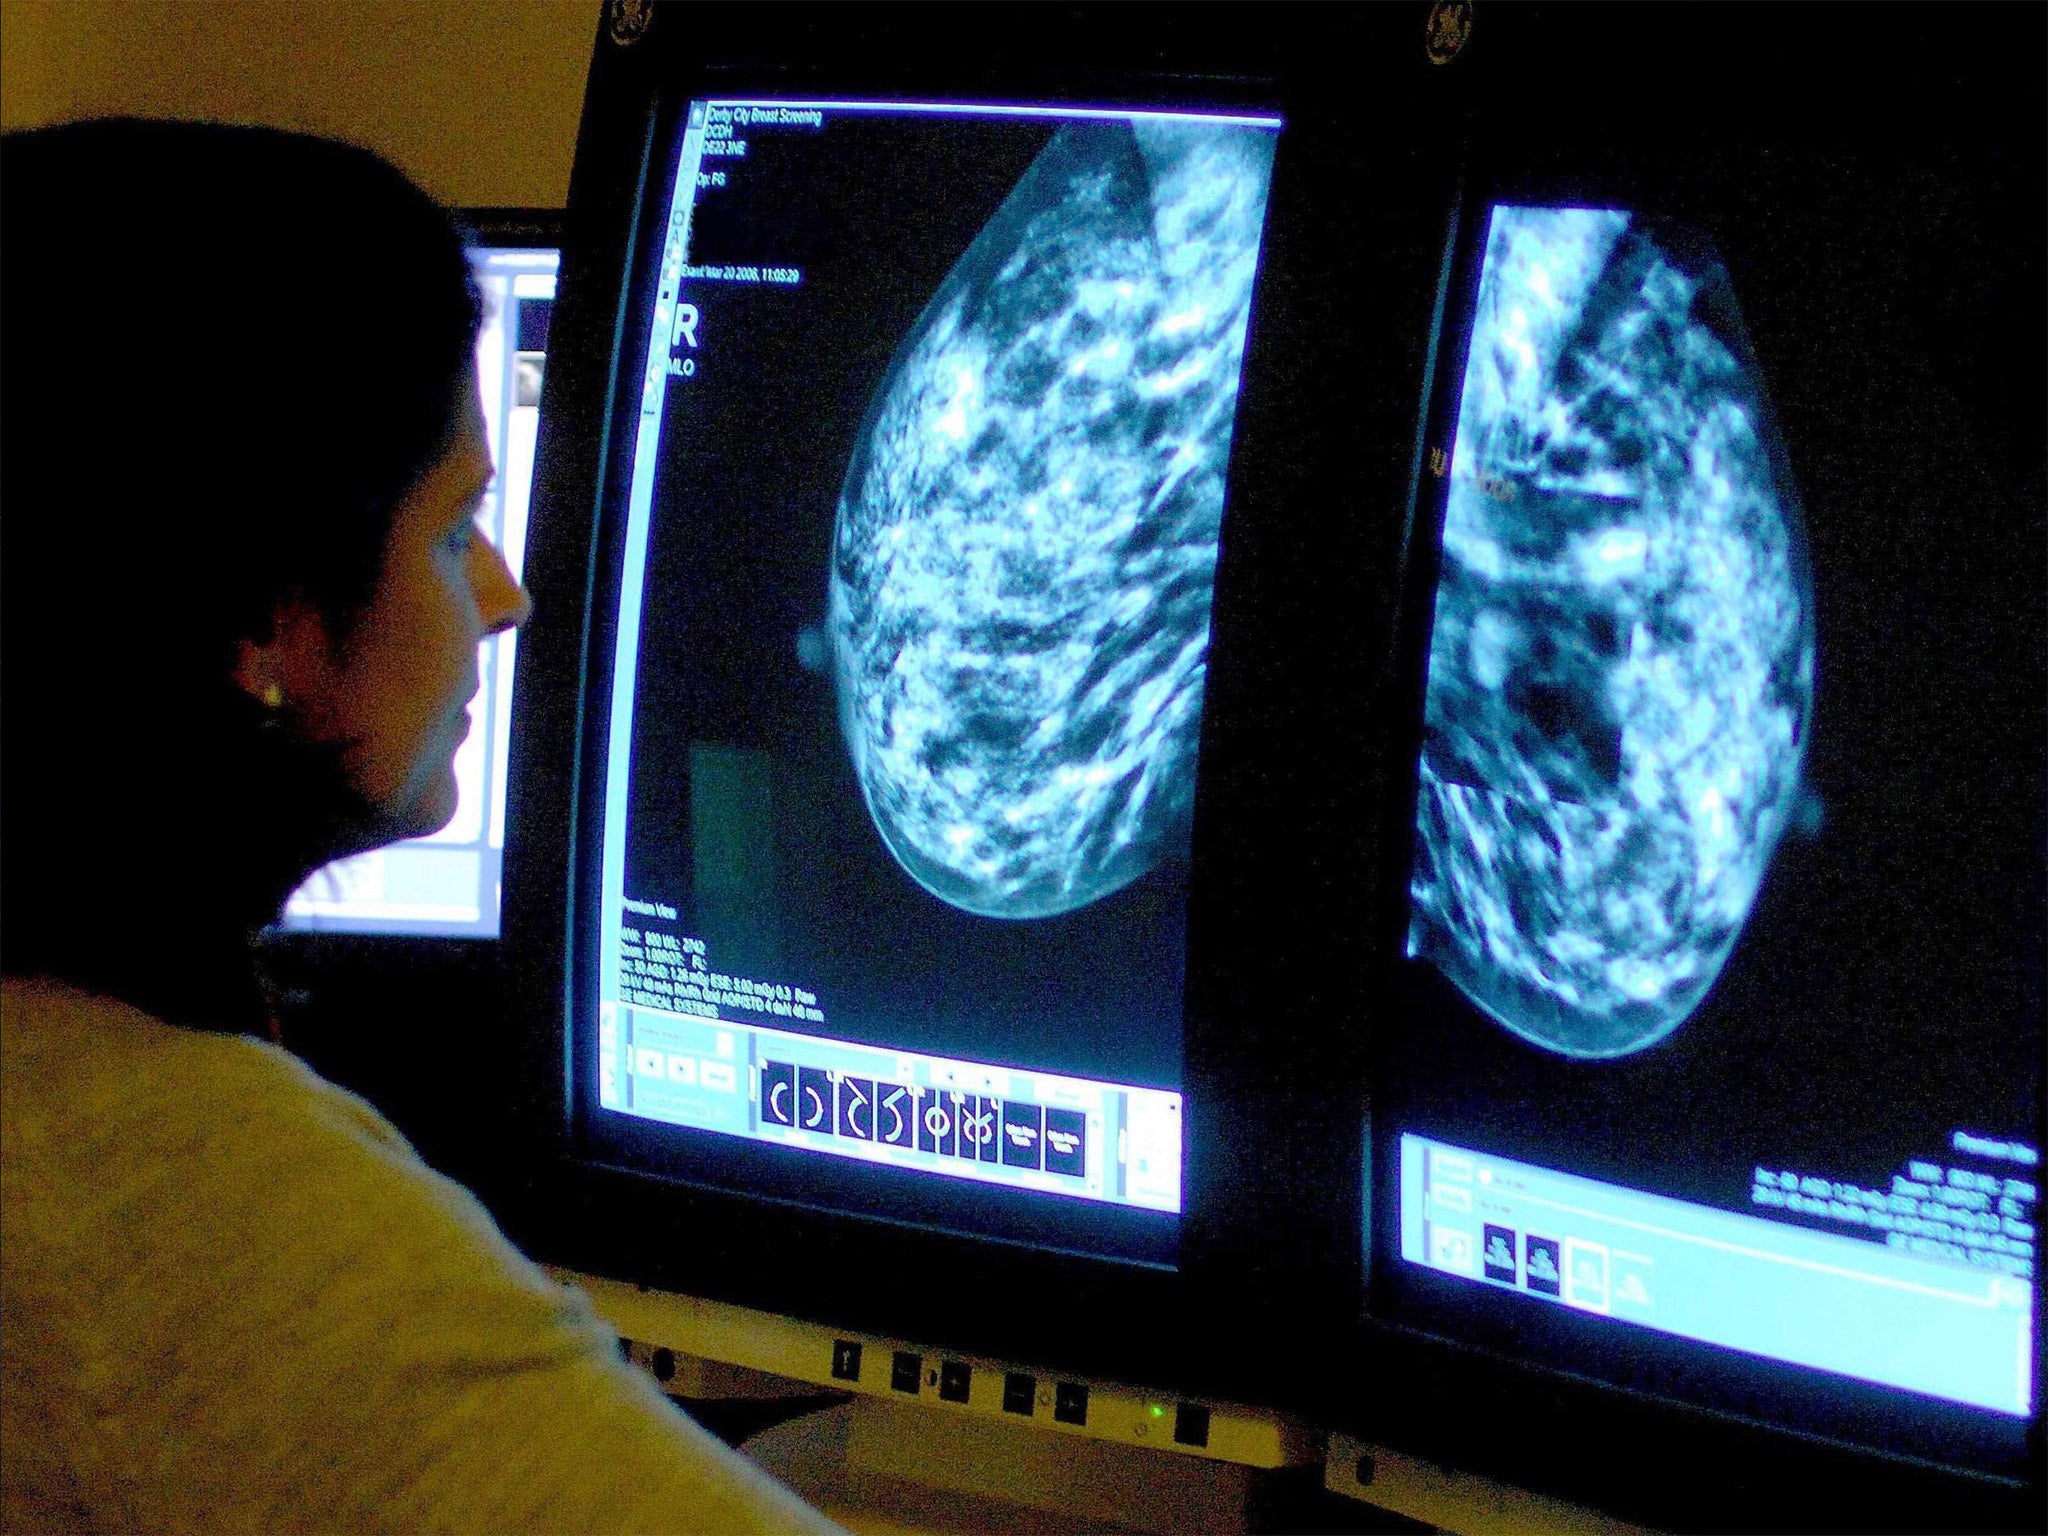 “This is important progress in the fight against breast cancer metastasis and these findings could lead to new treatments to stop secondary breast tumours growing in the bone, increasing the chances of survival for thousands of patients.”